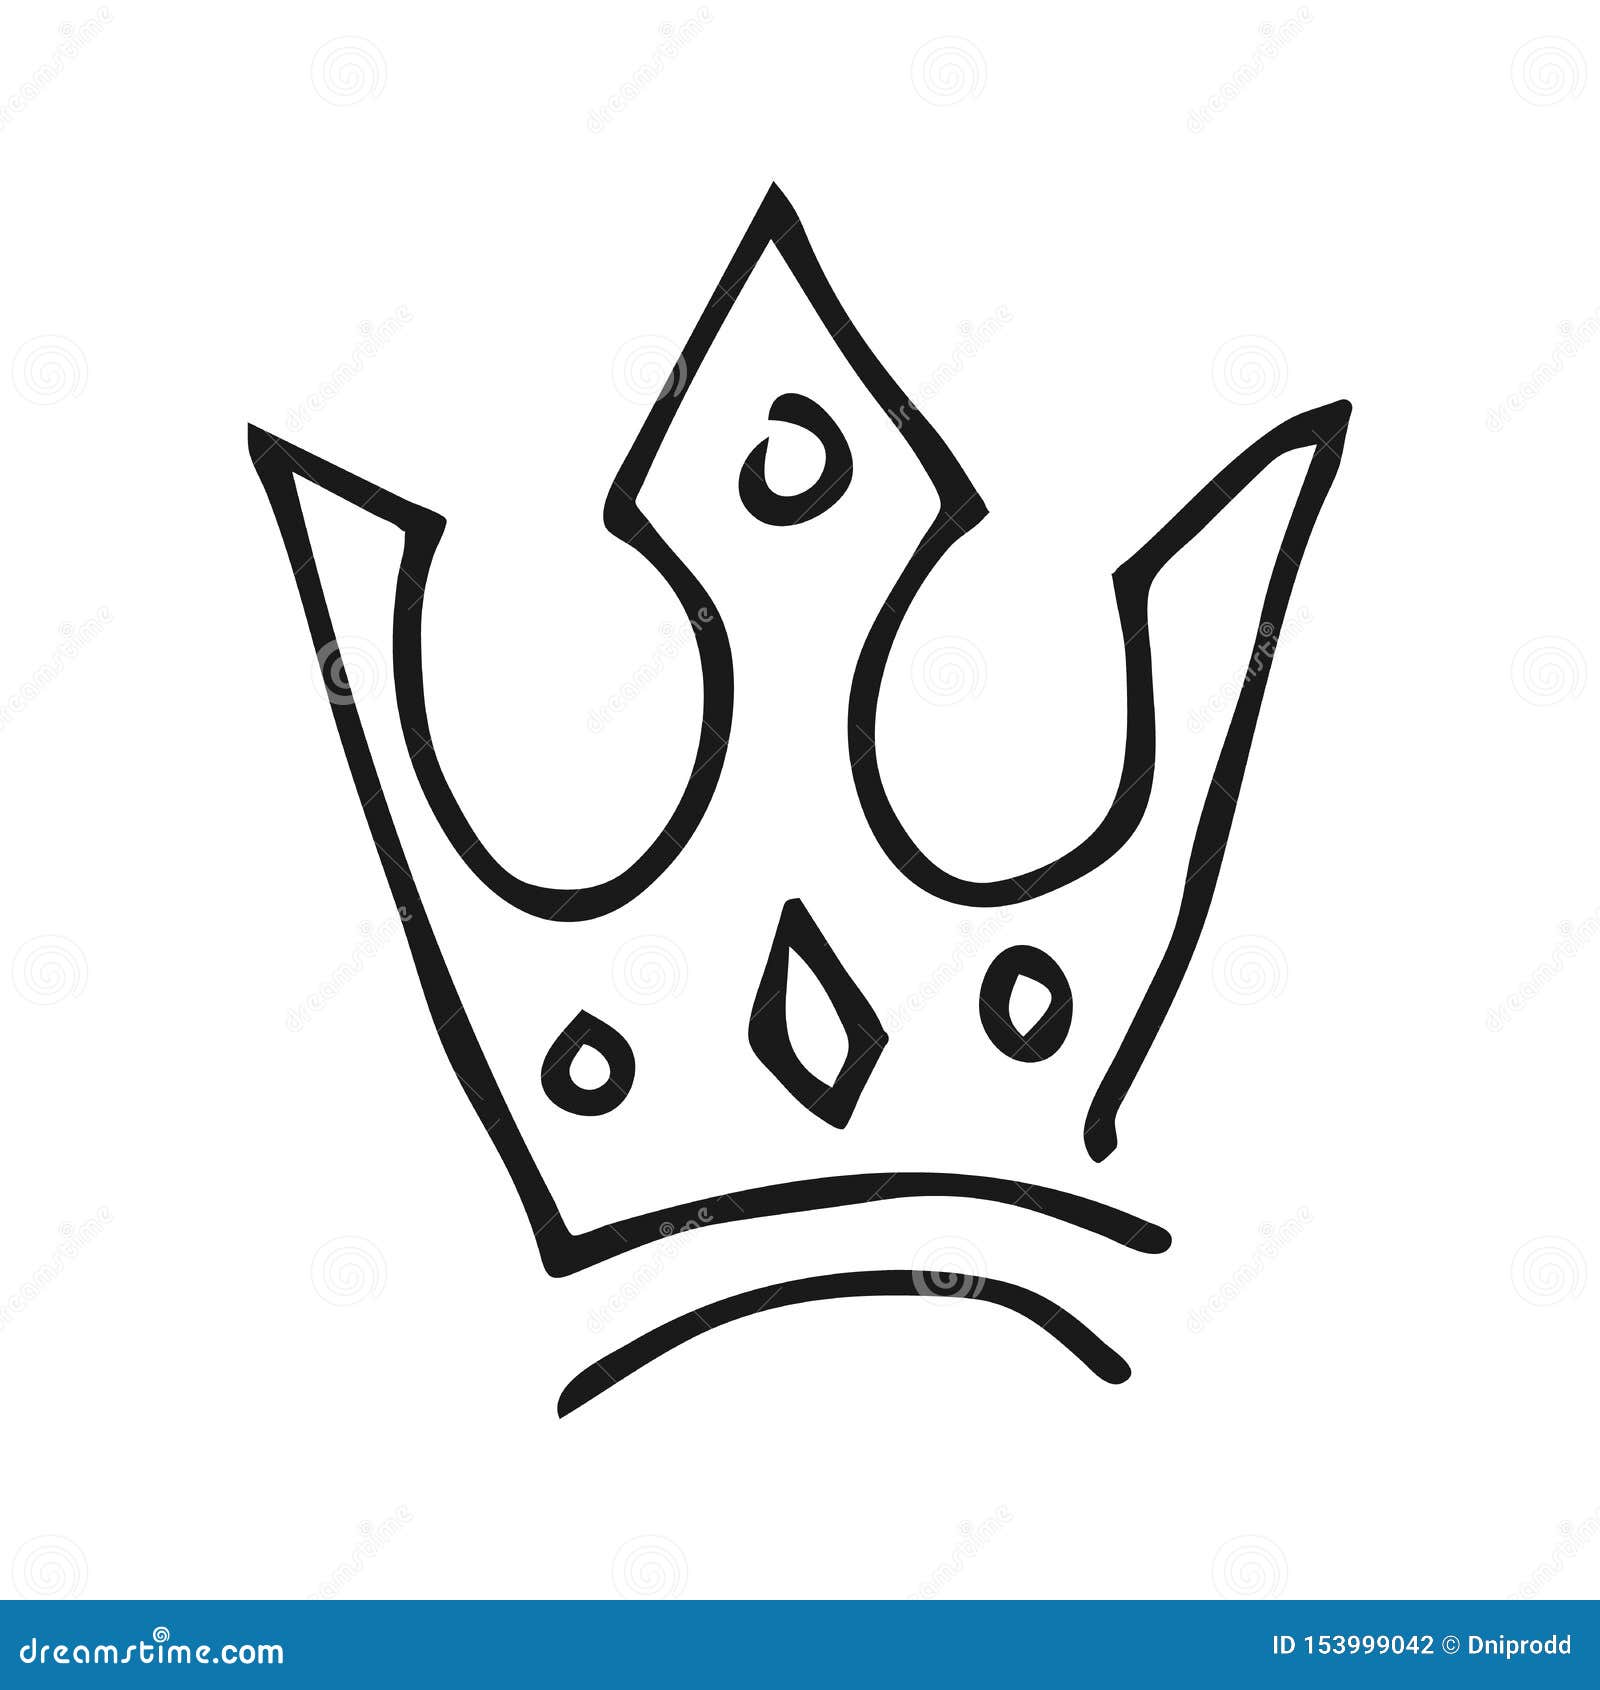 Simple Graffiti Sketch Queen or King Crown Stock Vector - Illustration ...